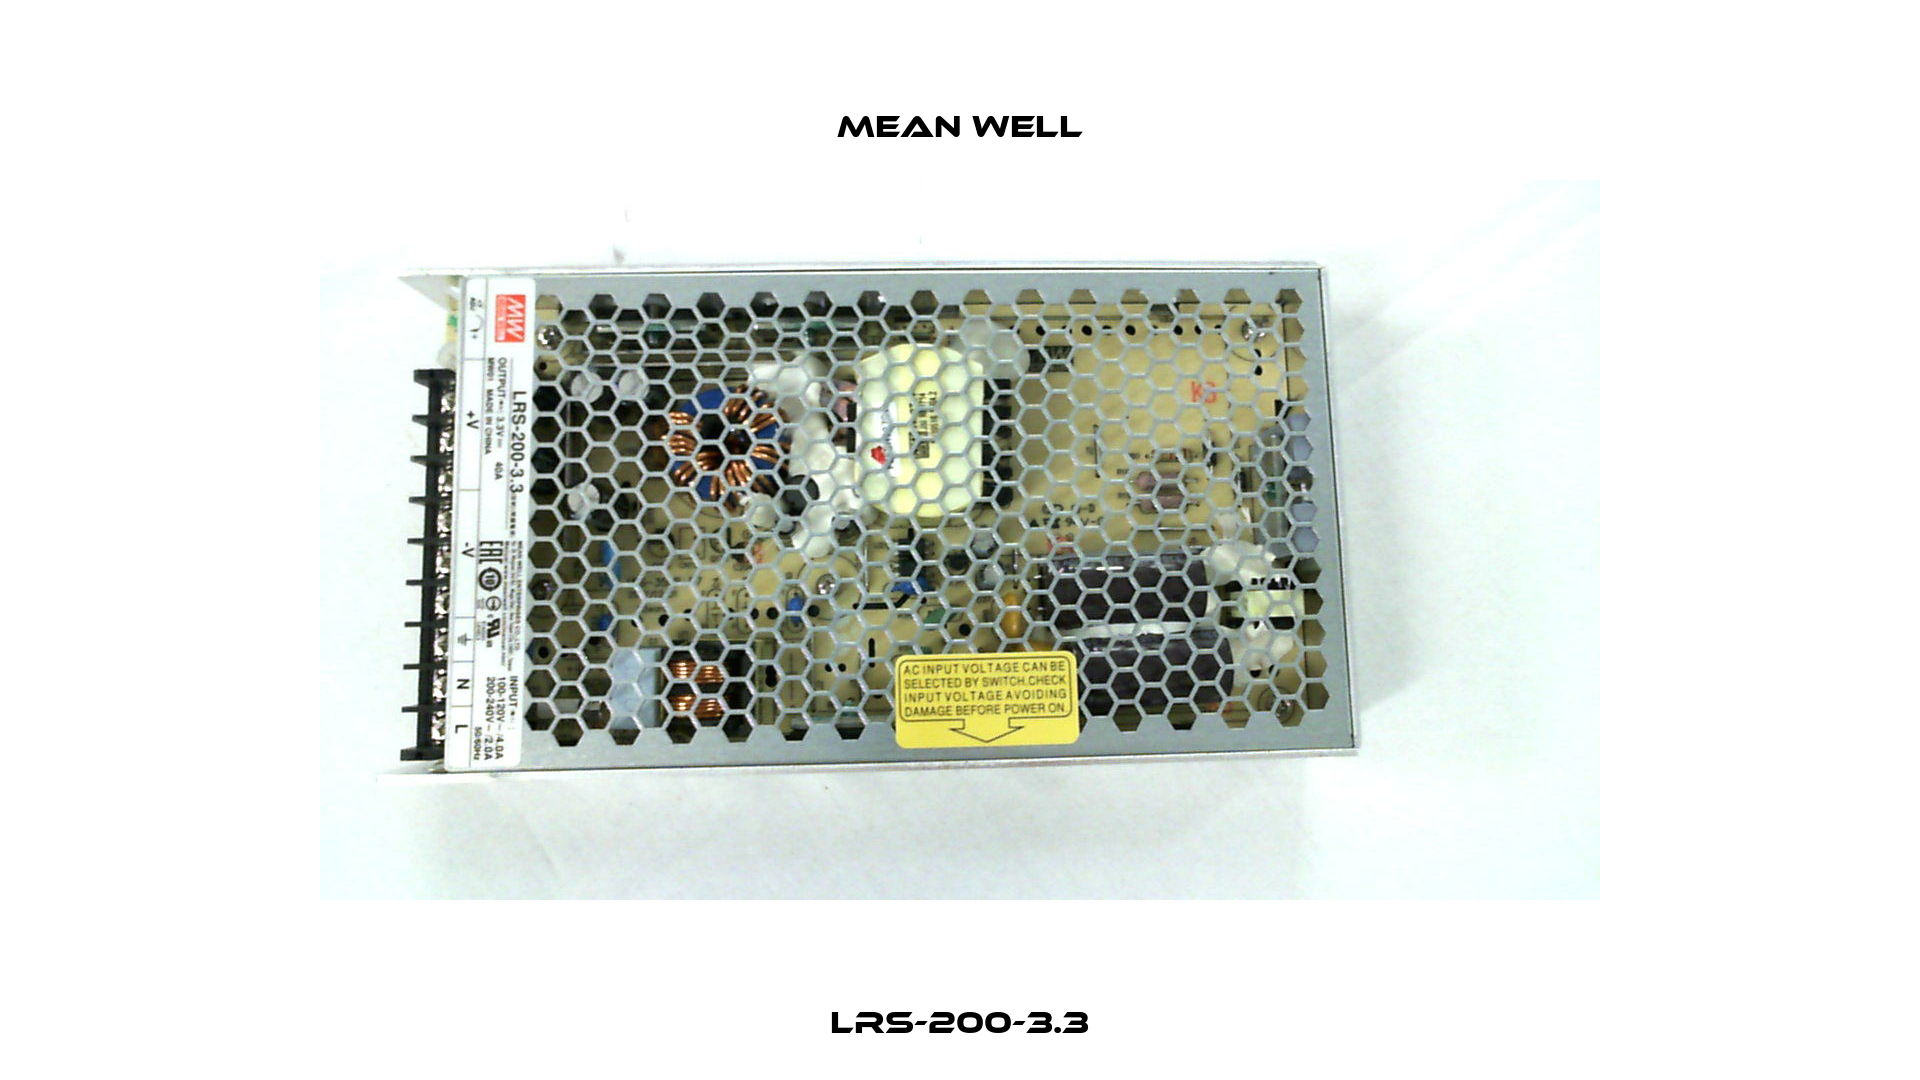 LRS-200-3.3 Mean Well